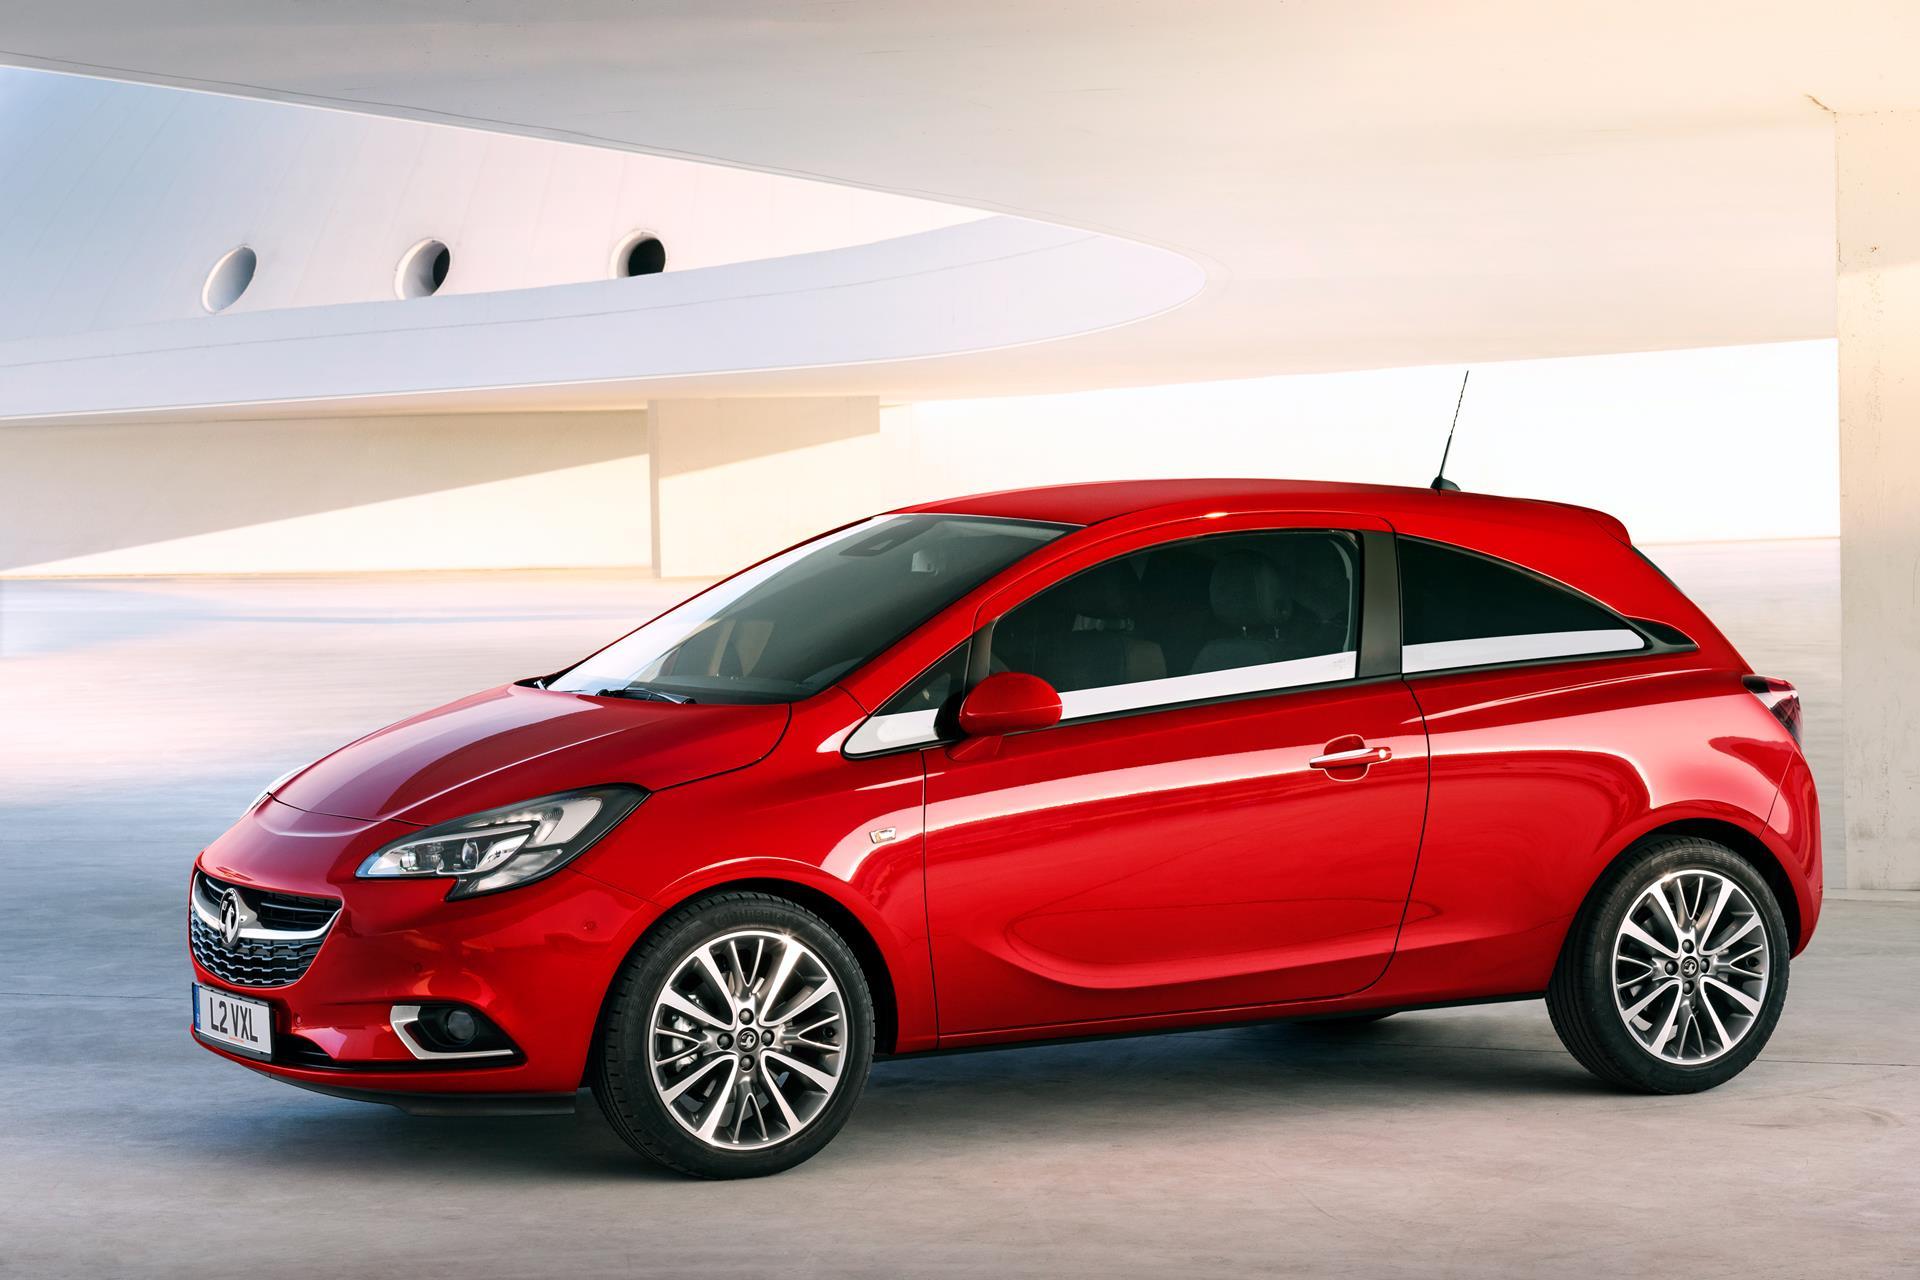 Vauxhall Corsa Wallpapers and Wallpaper Gallery